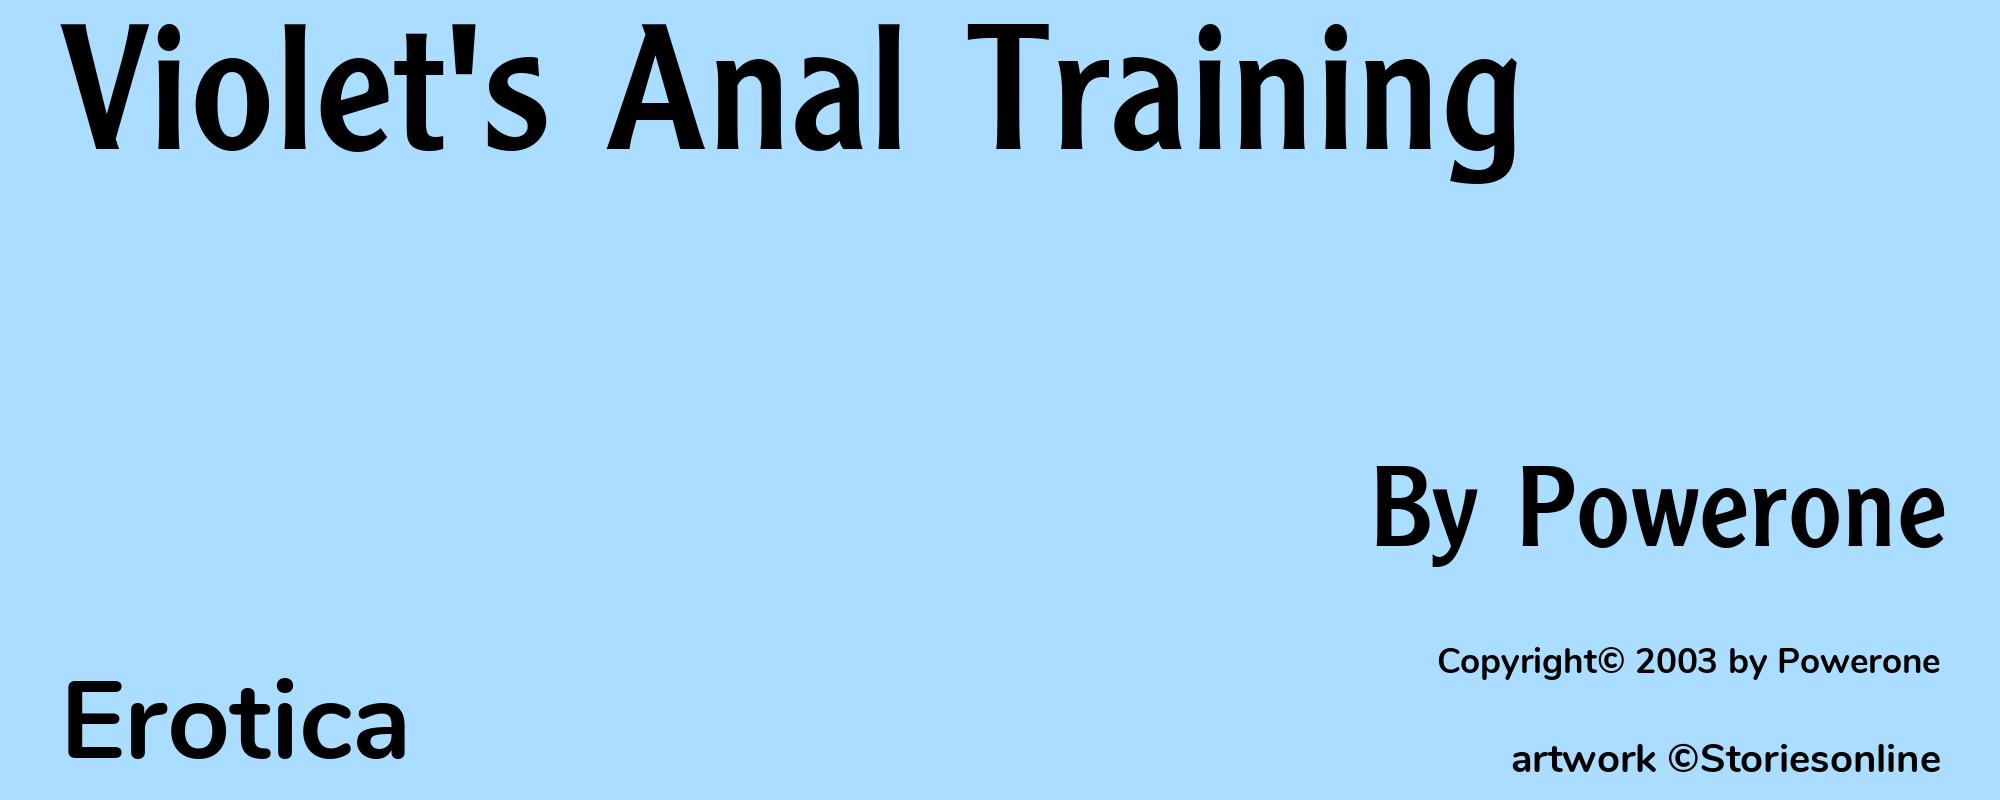 Violet's Anal Training - Cover